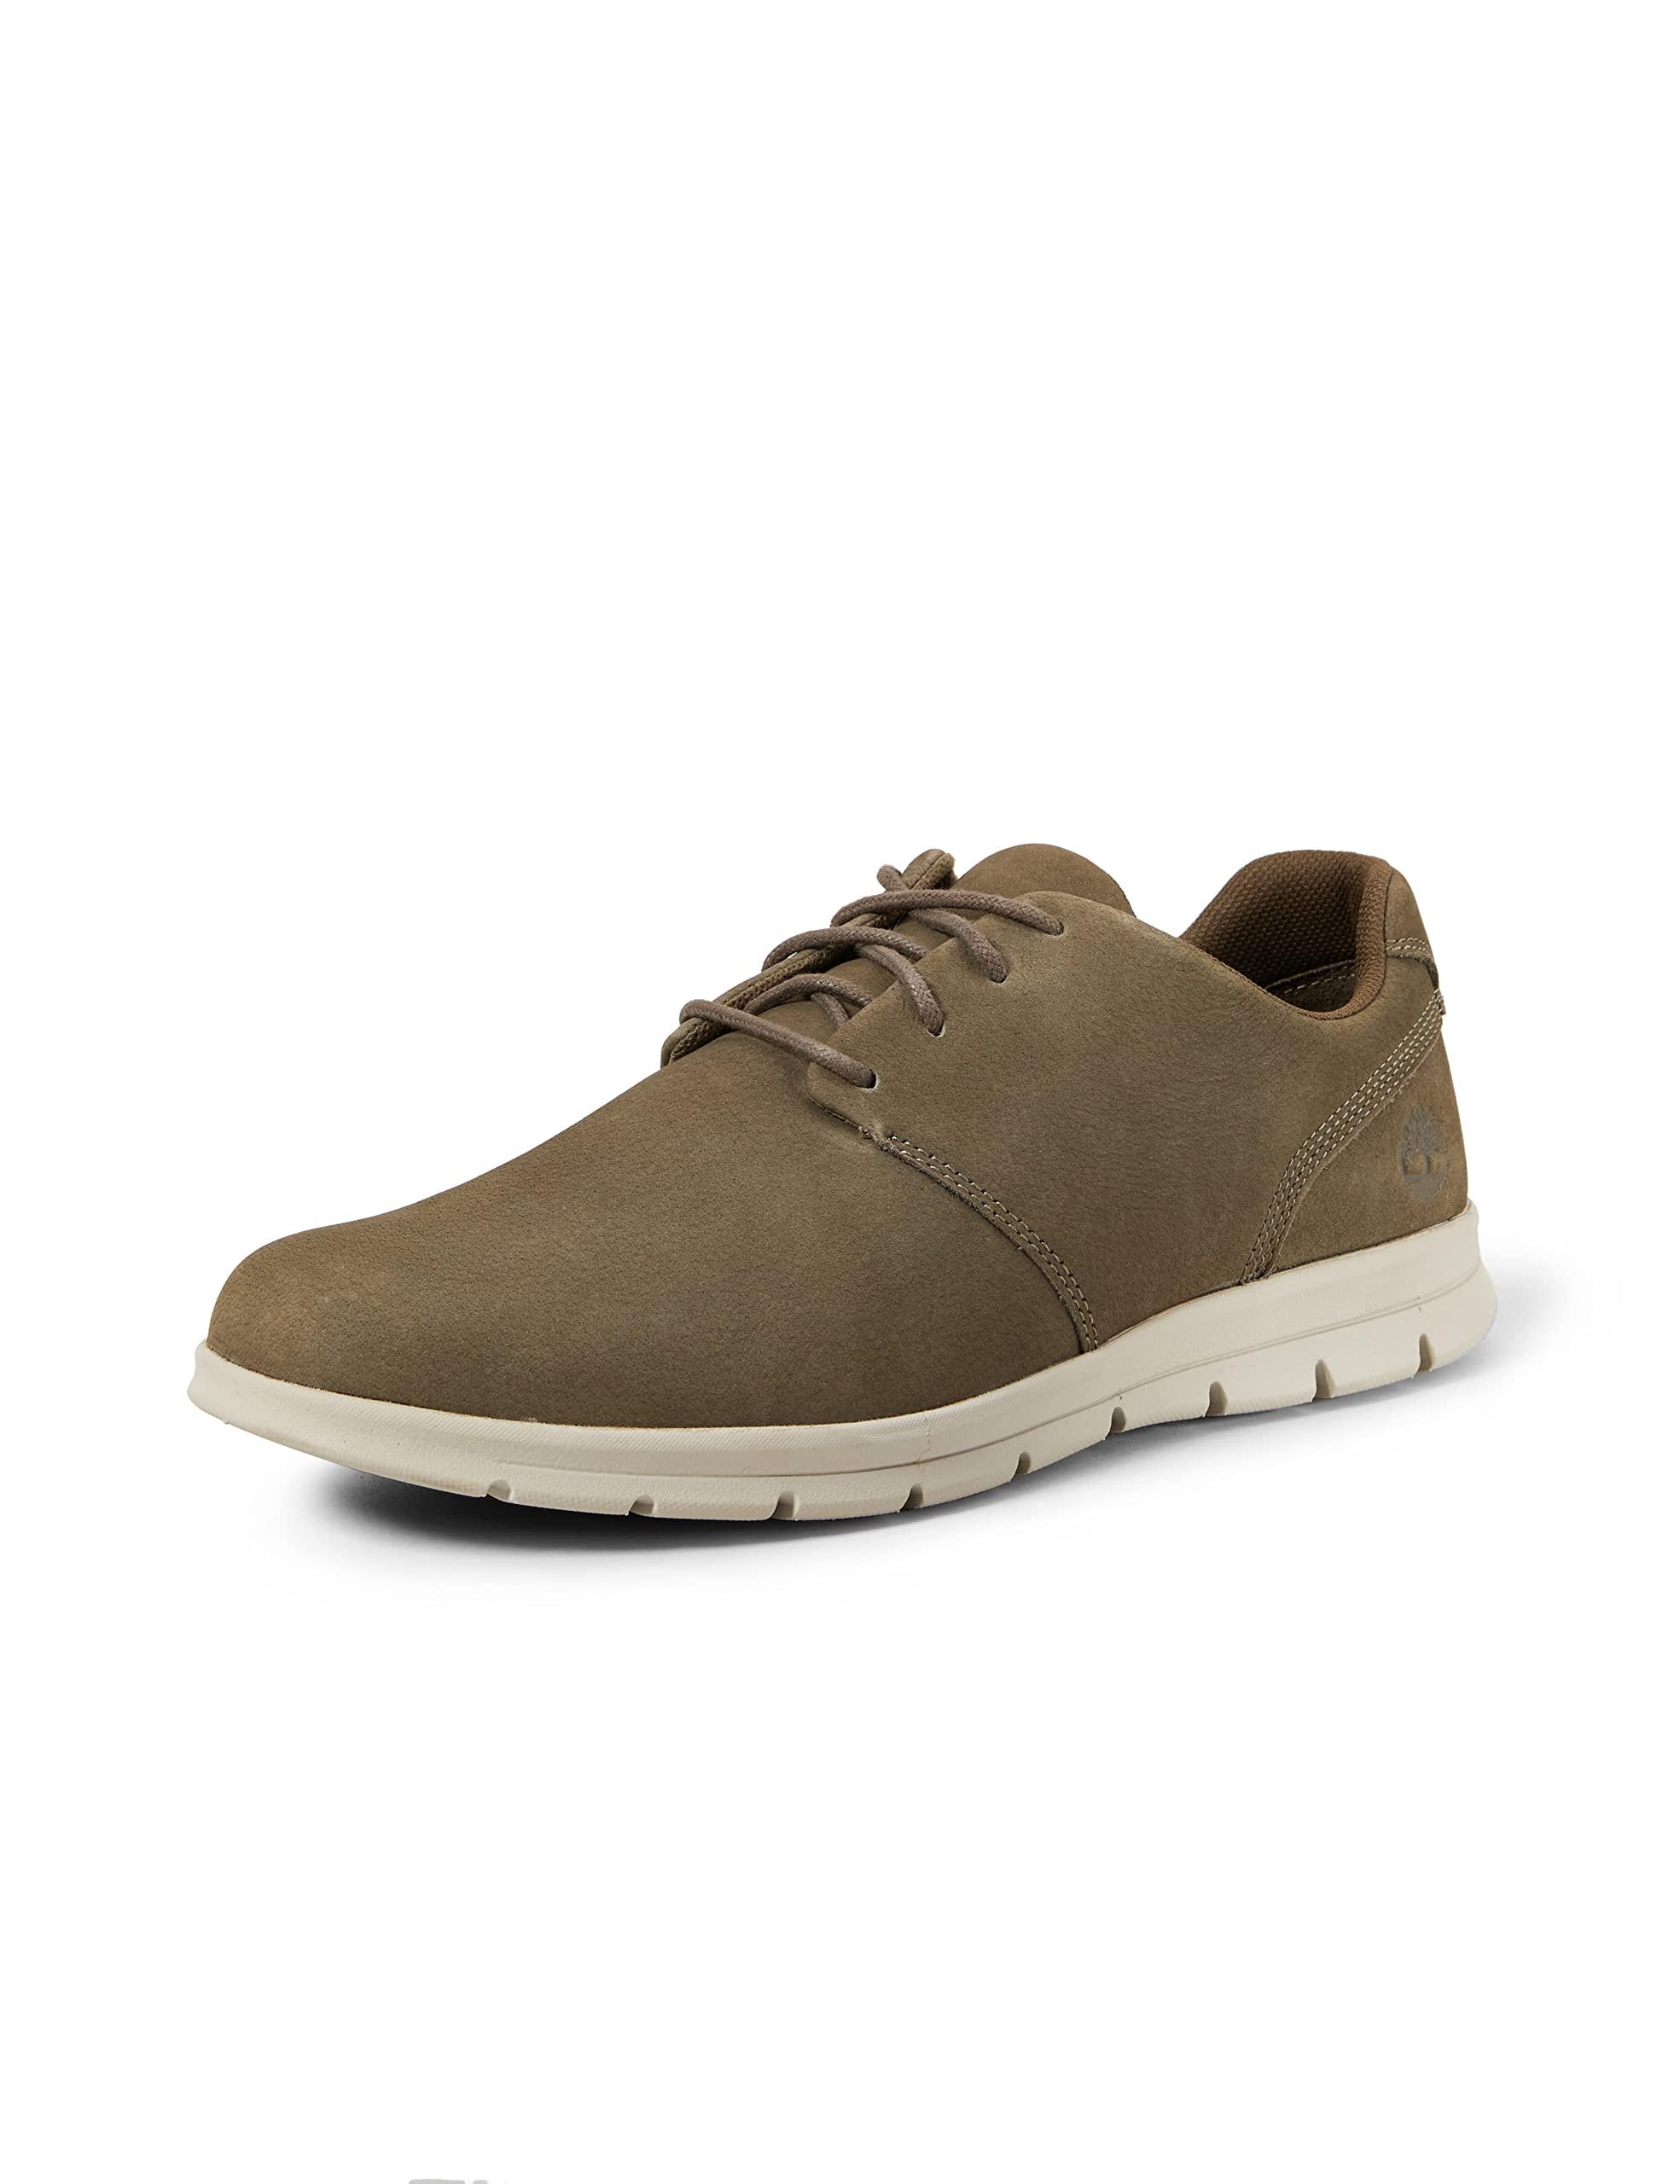 Timberland Graydon Oxford Basic Shoes in Green for Men | Lyst UK